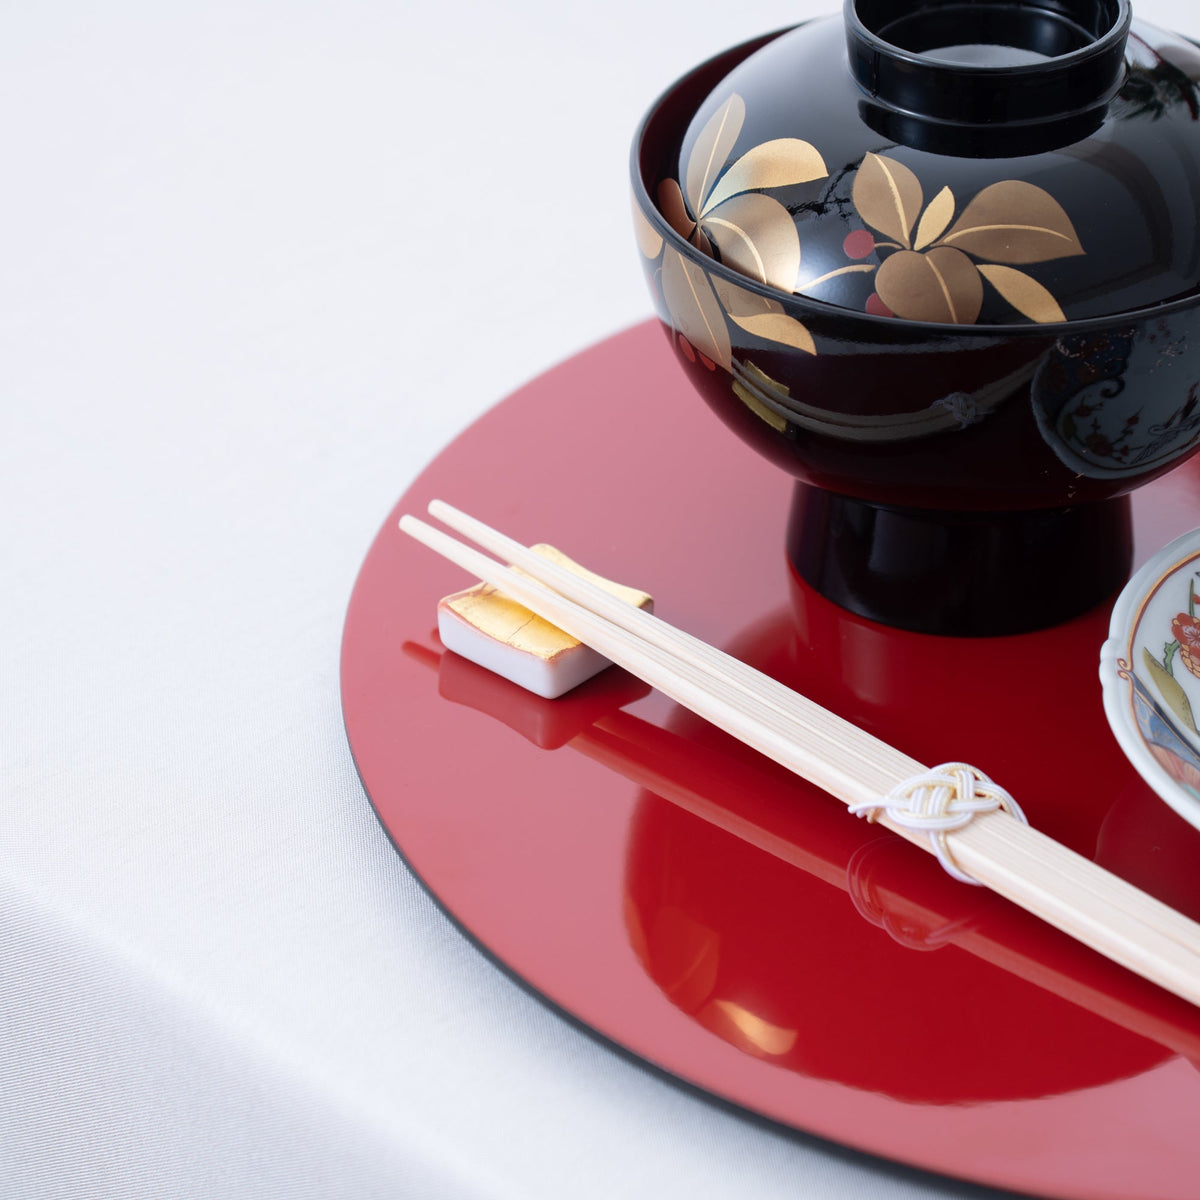 16 piece Japanese-style sushi set, includes 4 sushi plates and soya sauce  dish with 4 chopsticks and chopstick holders